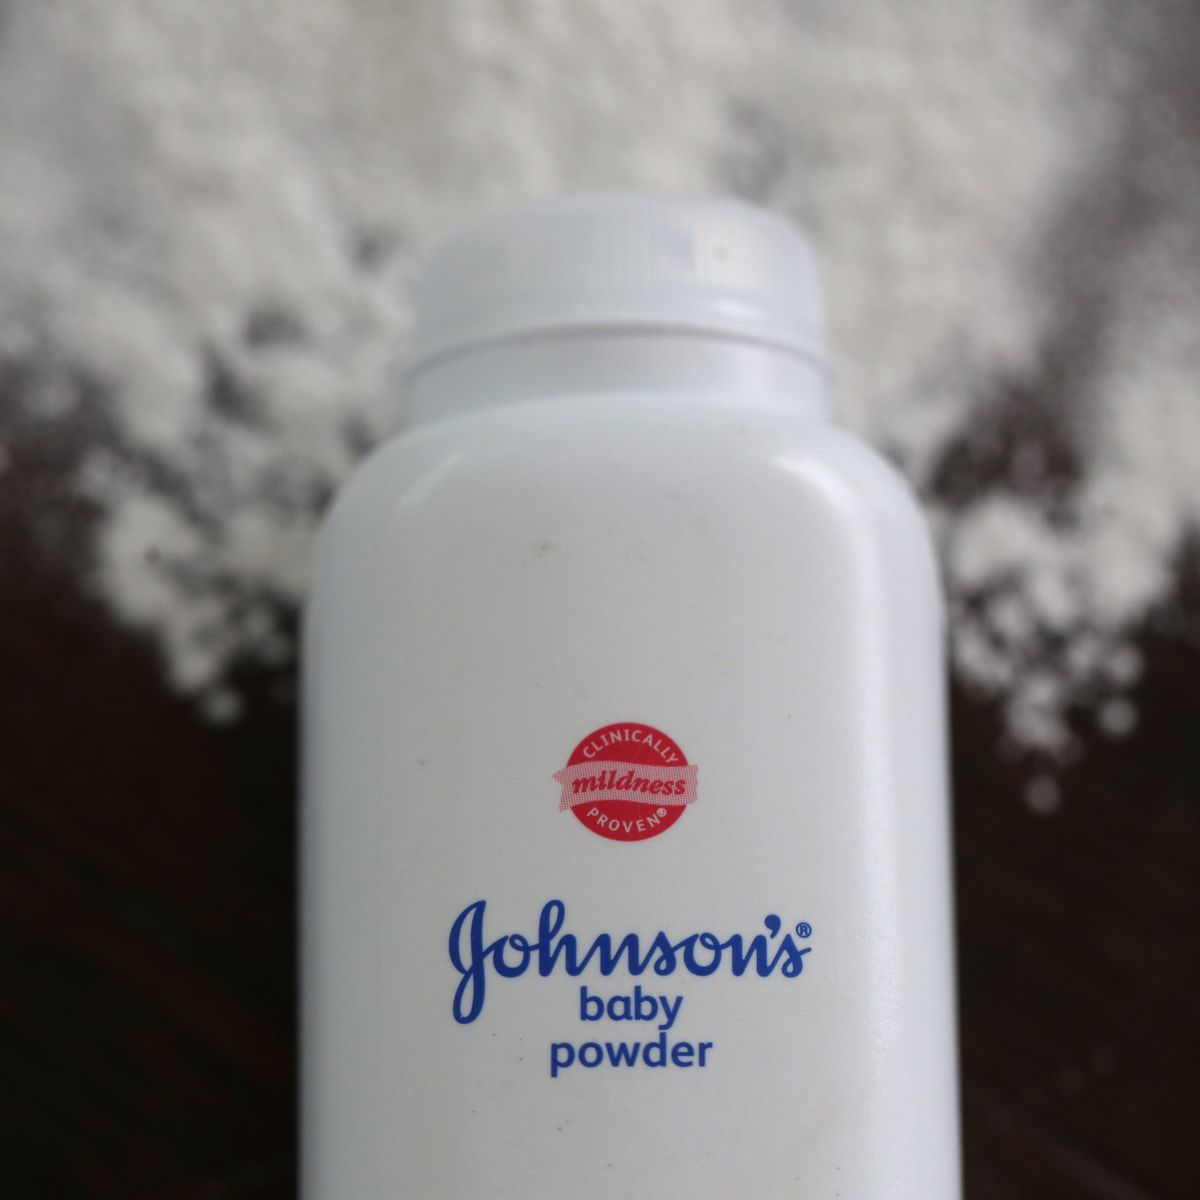 J&J will discontinue selling talcum based baby powder in US and Canada